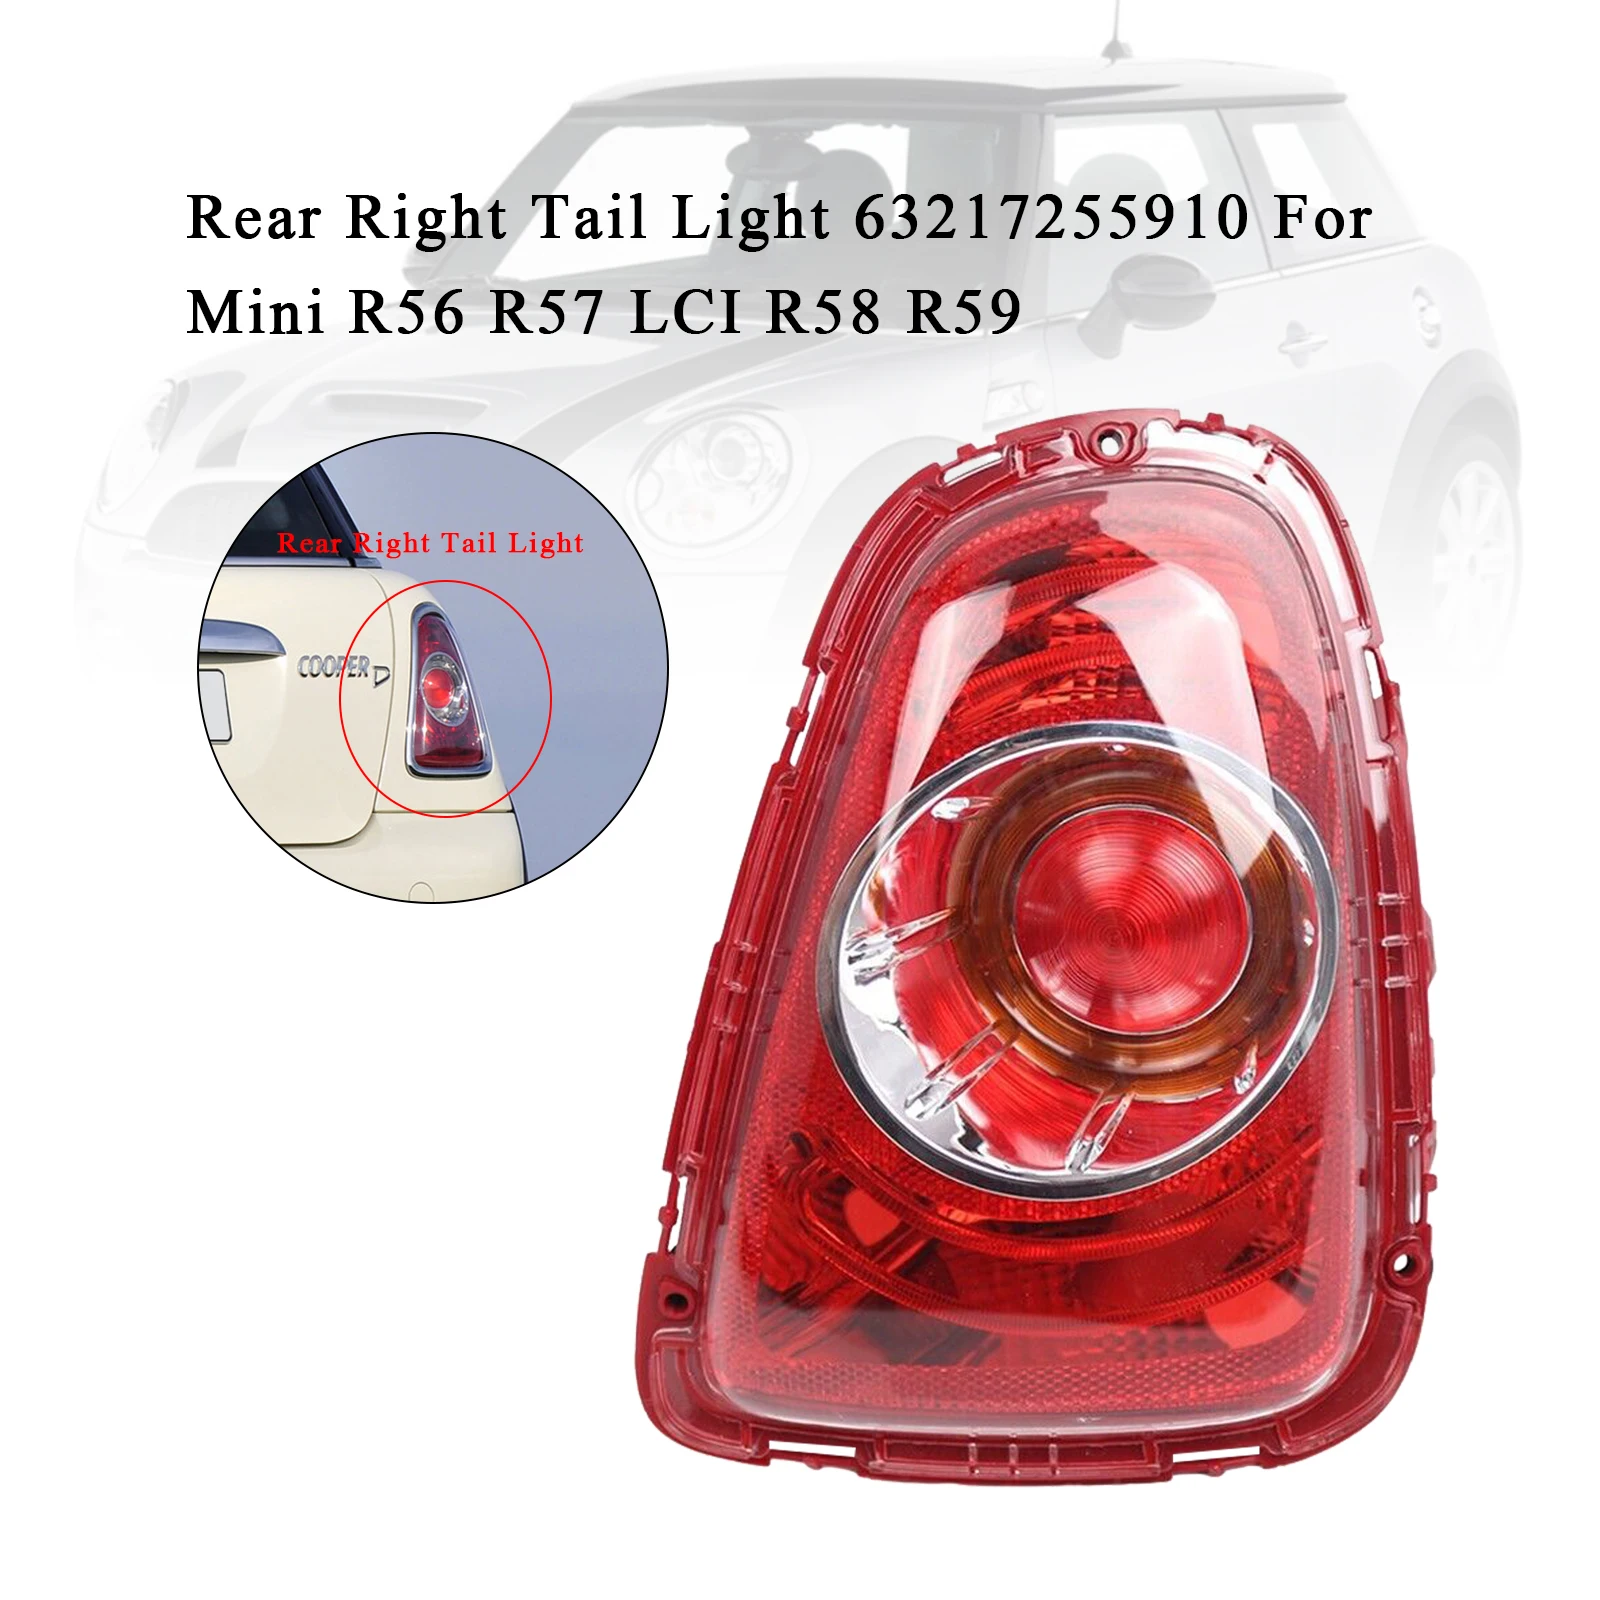 

Areyourshop Rear Right Tail Light 63217255910 For Mini R56 R57 LCI R58 R59